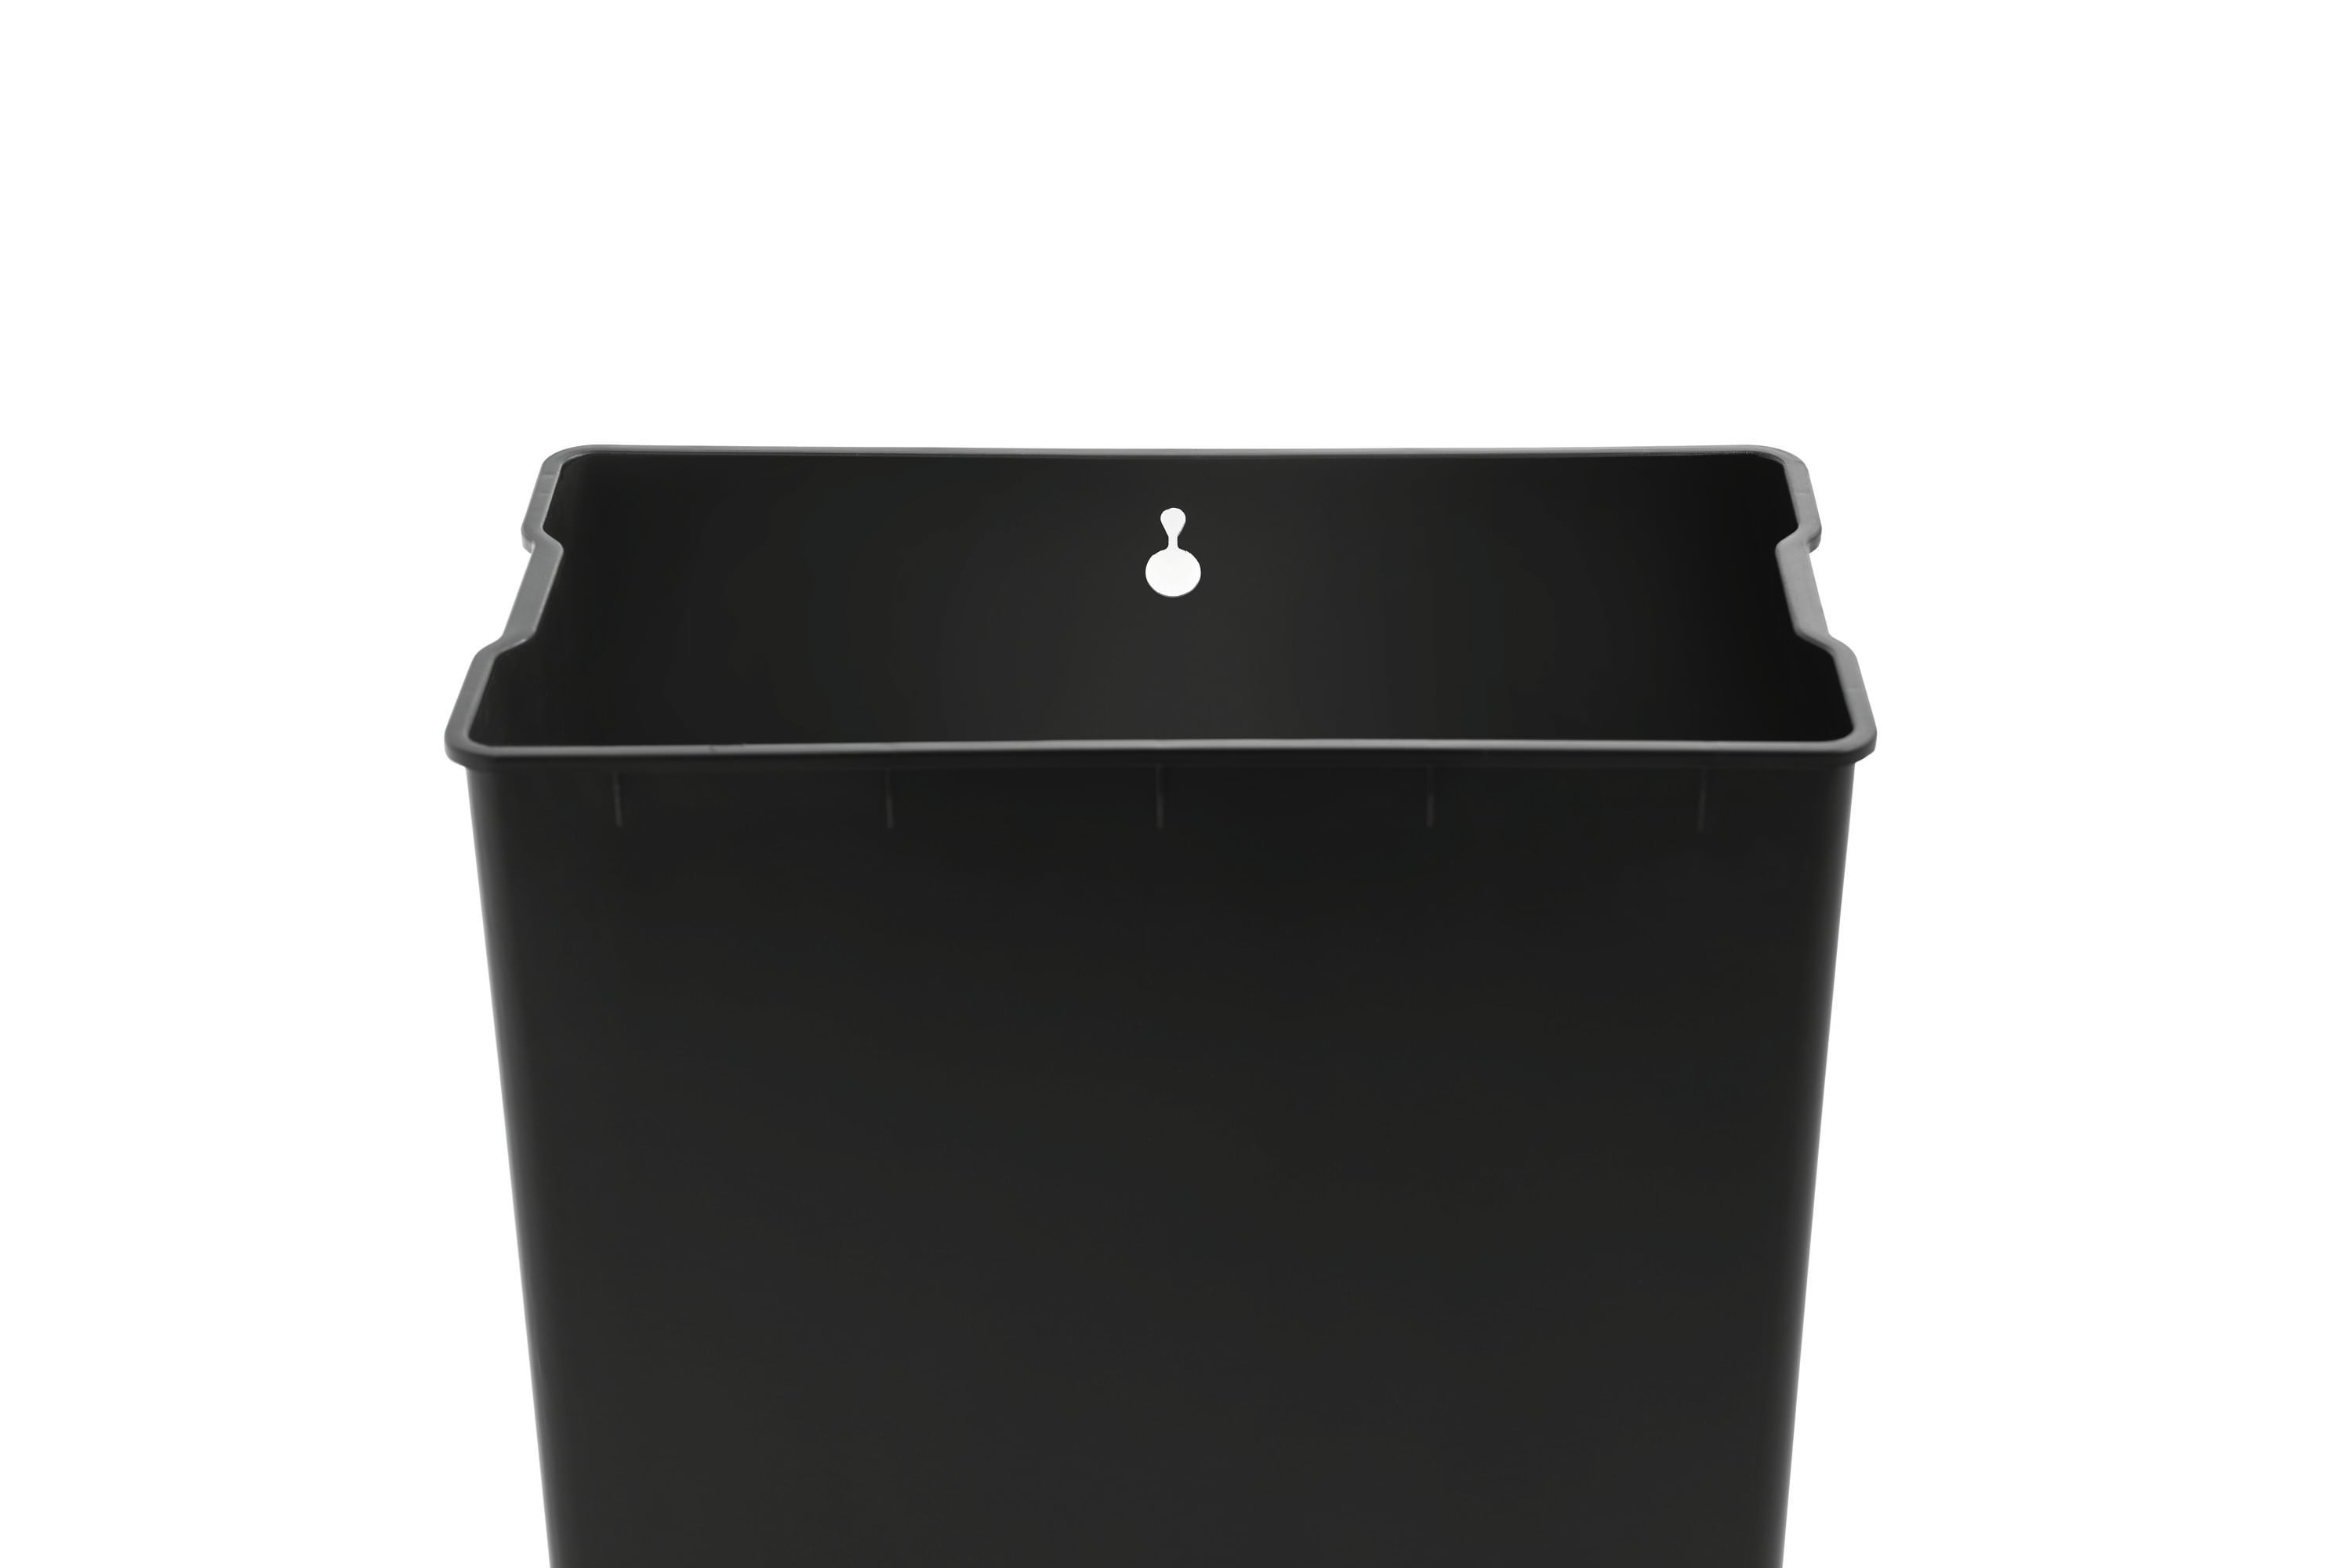 Rubbermaid - Trash Can: 12 gal, Round, Gray - 77315661 - MSC Industrial  Supply